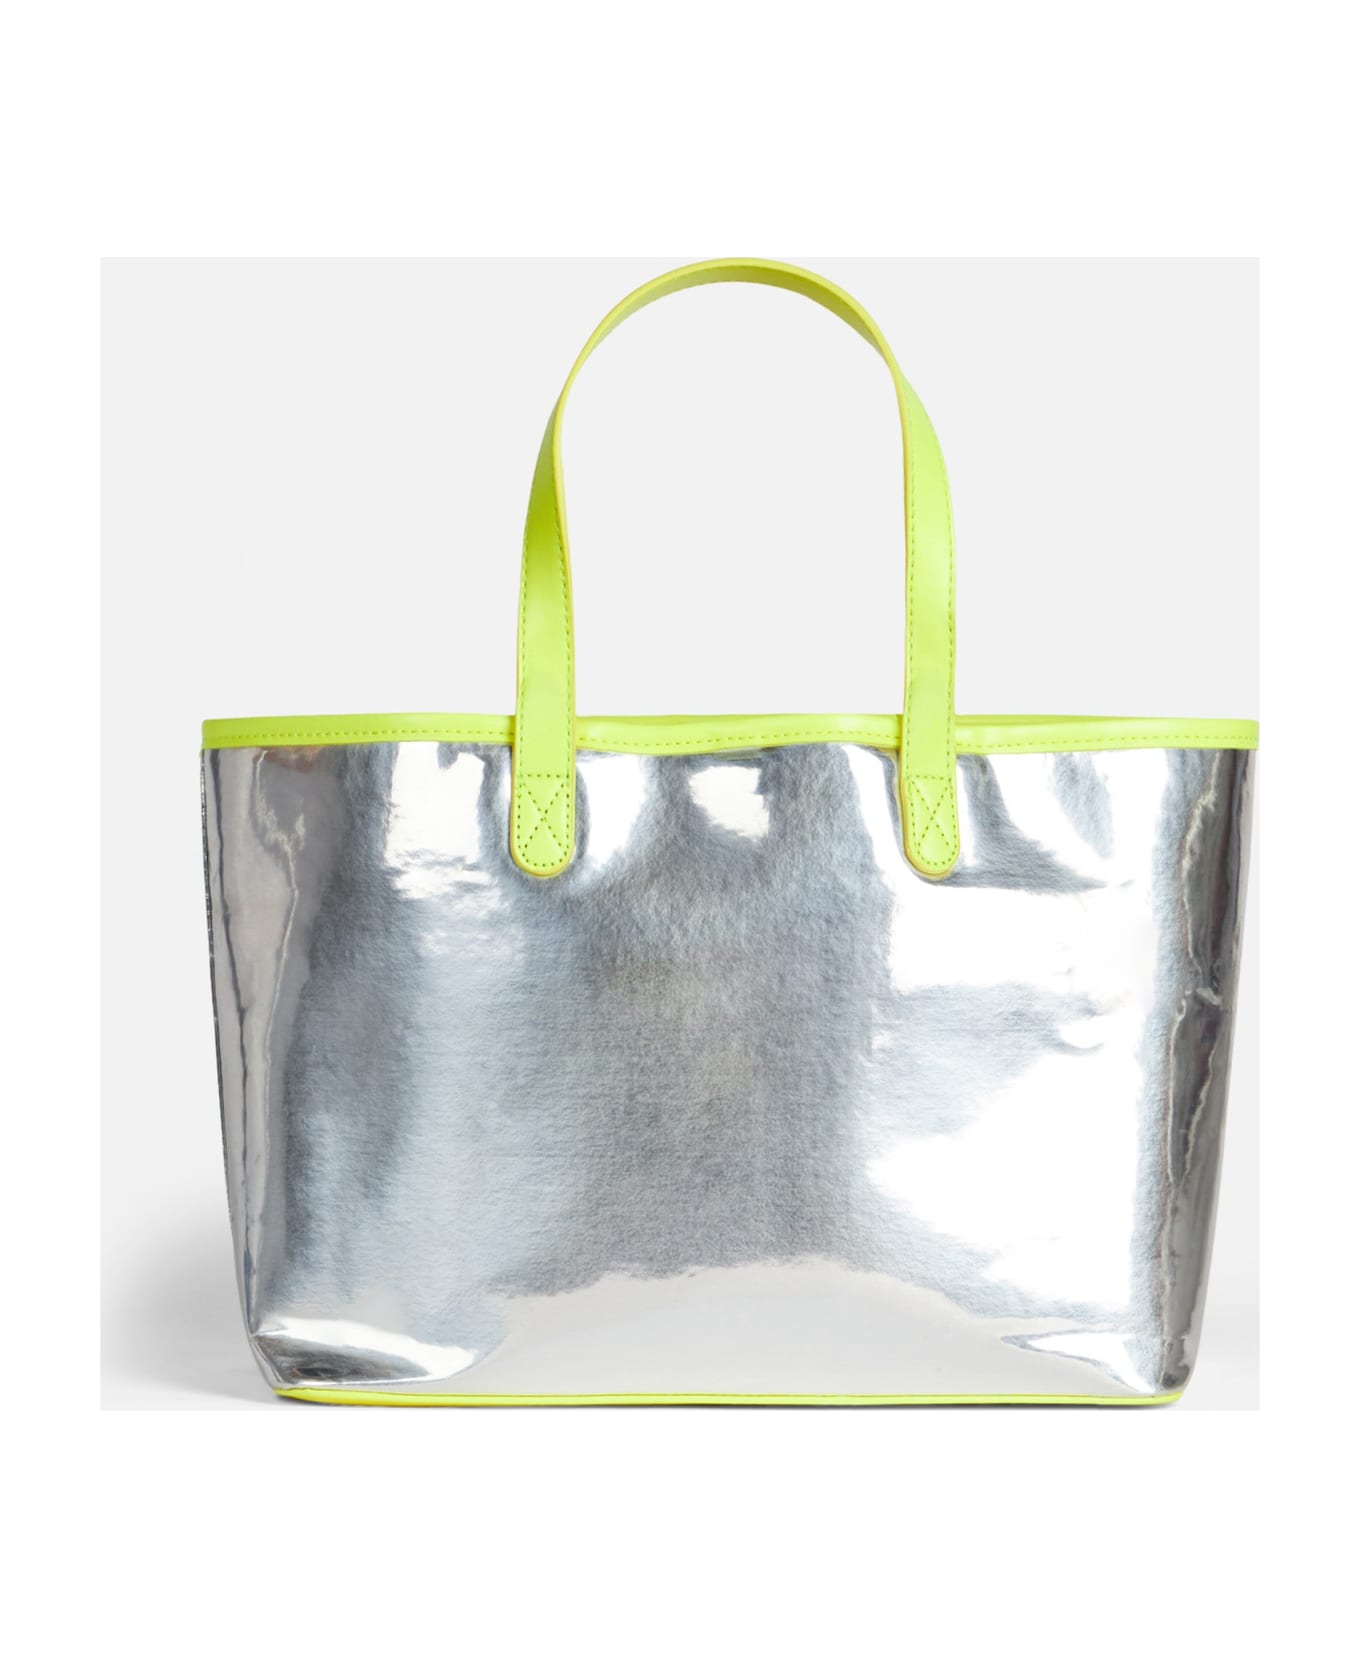 MC2 Saint Barth Silver Reflex Bag With Yellow Fluo Details - YELLOW トートバッグ